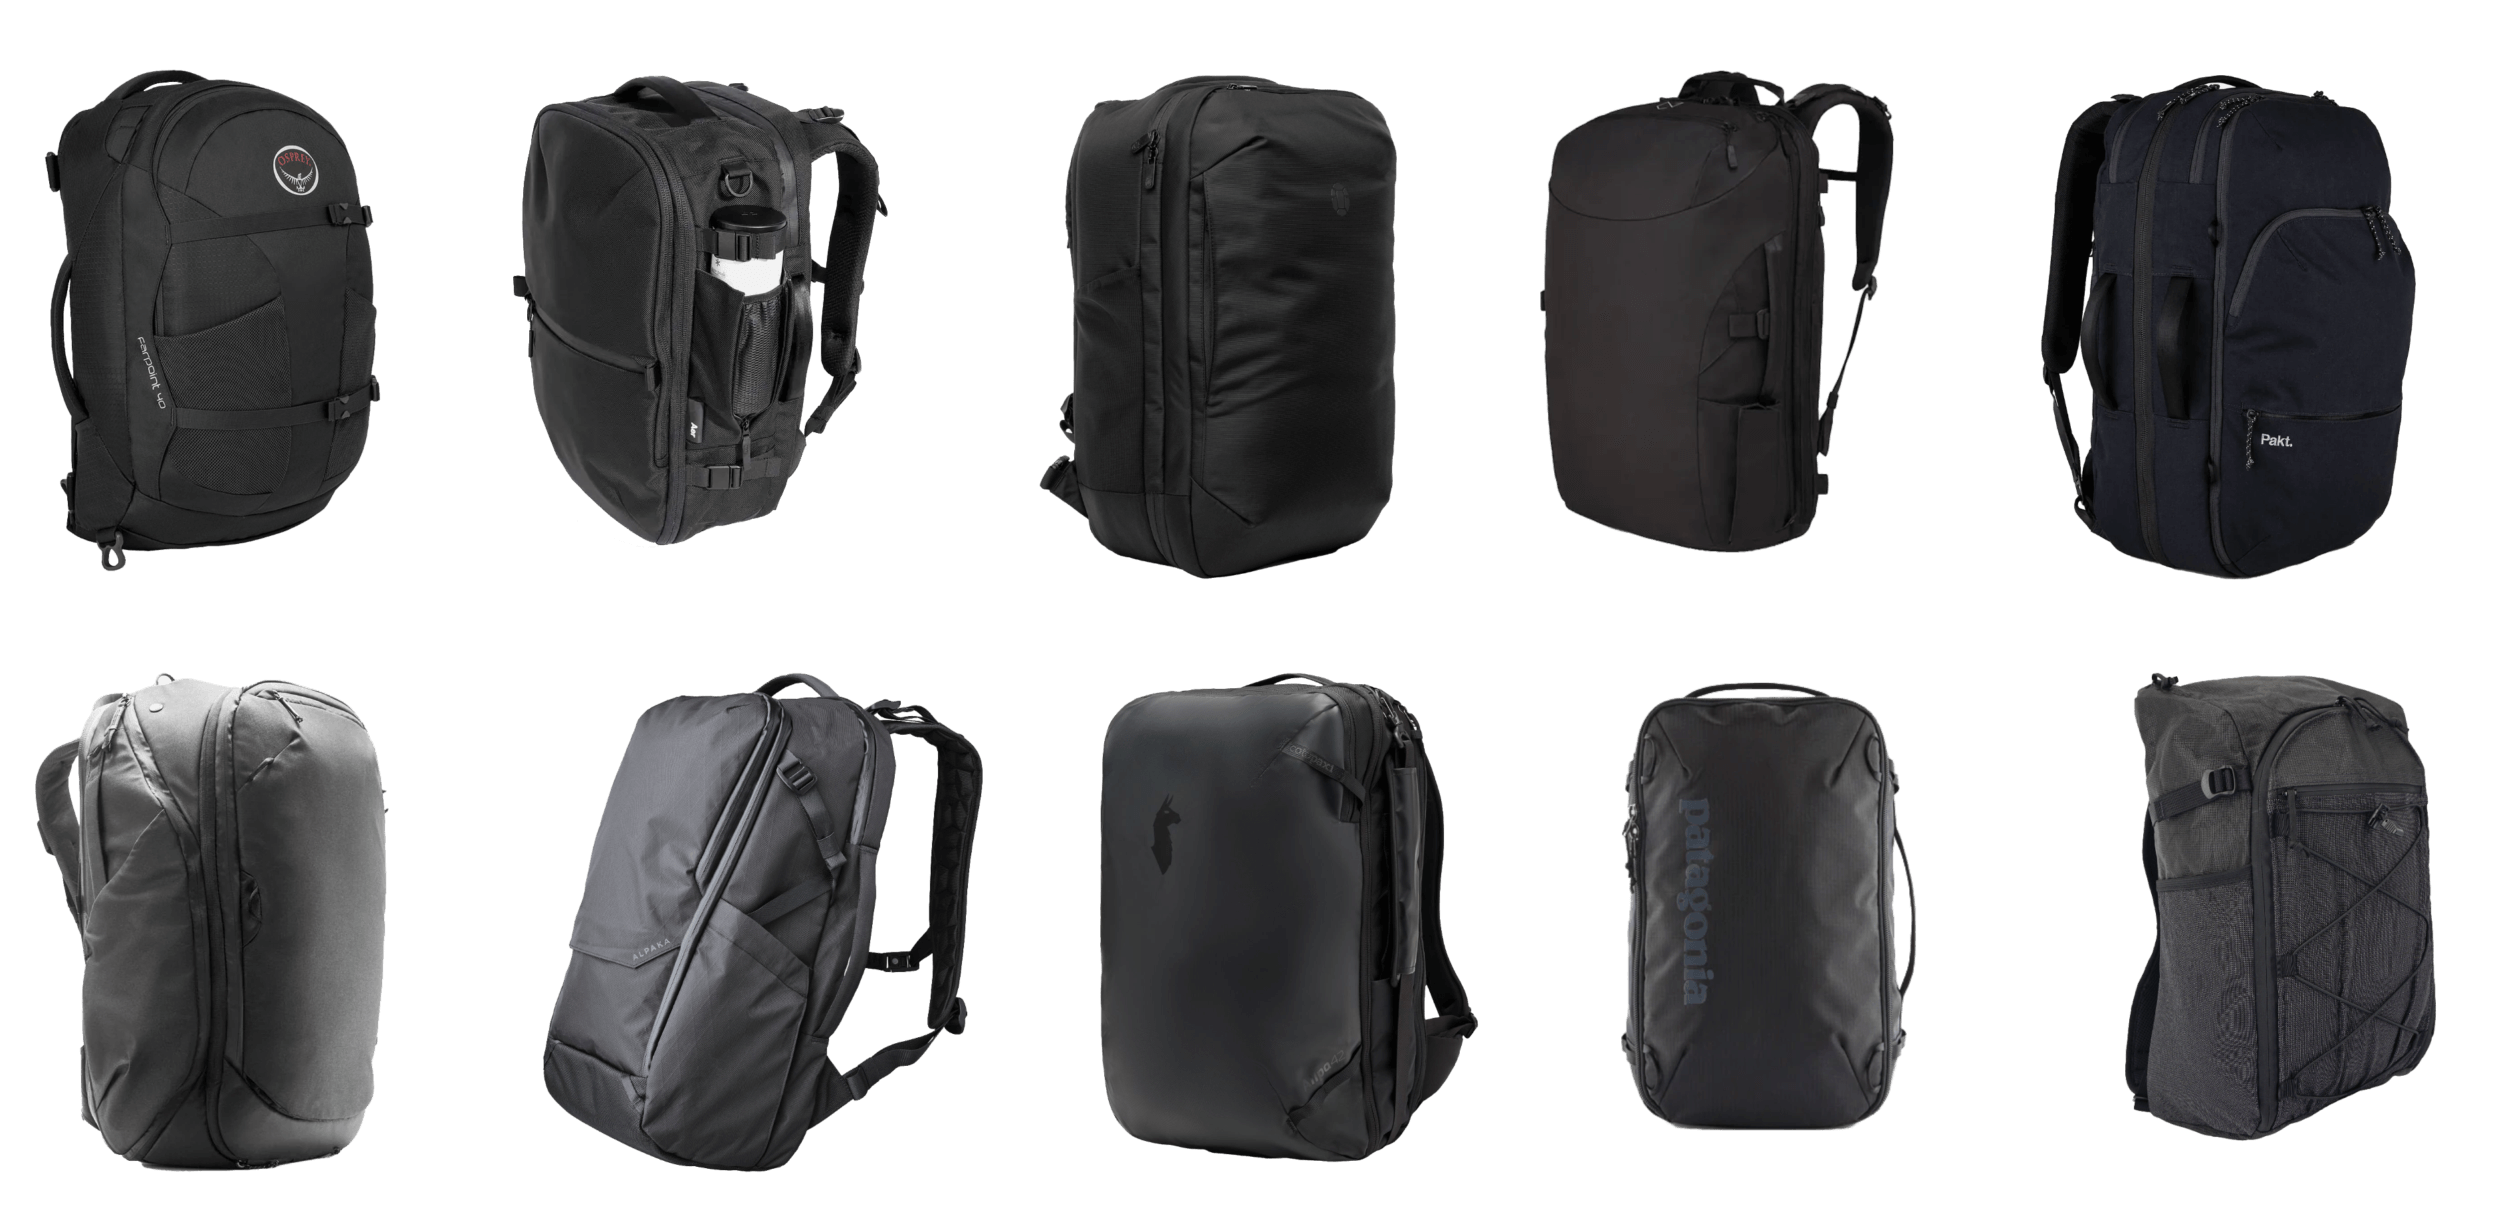 An assorted group of 10 different black travel backpacks, two rows with 5 columns each.